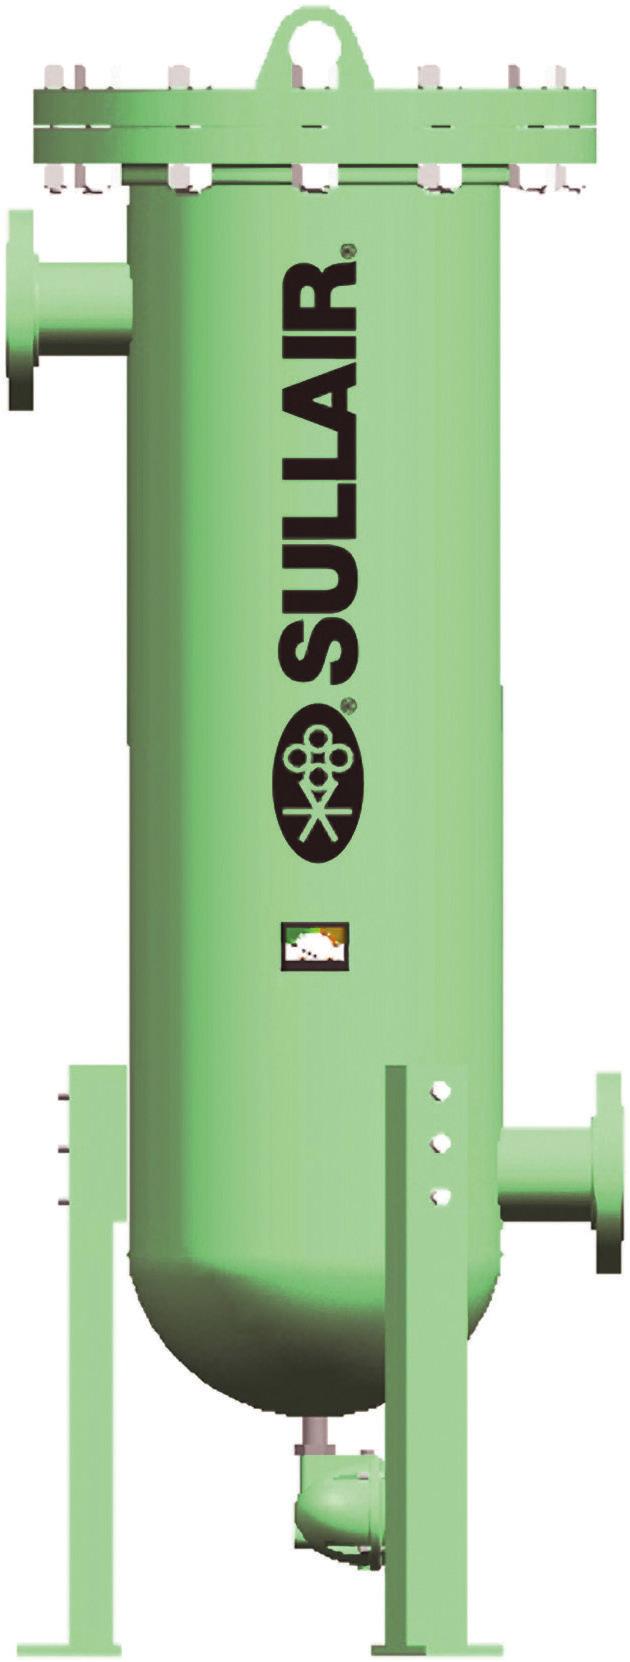 SULLAIR Mist Eliminators The time-tested range of Sullair Mist Eliminators combine extensive research and development with decades of experience in compressed air treatment.